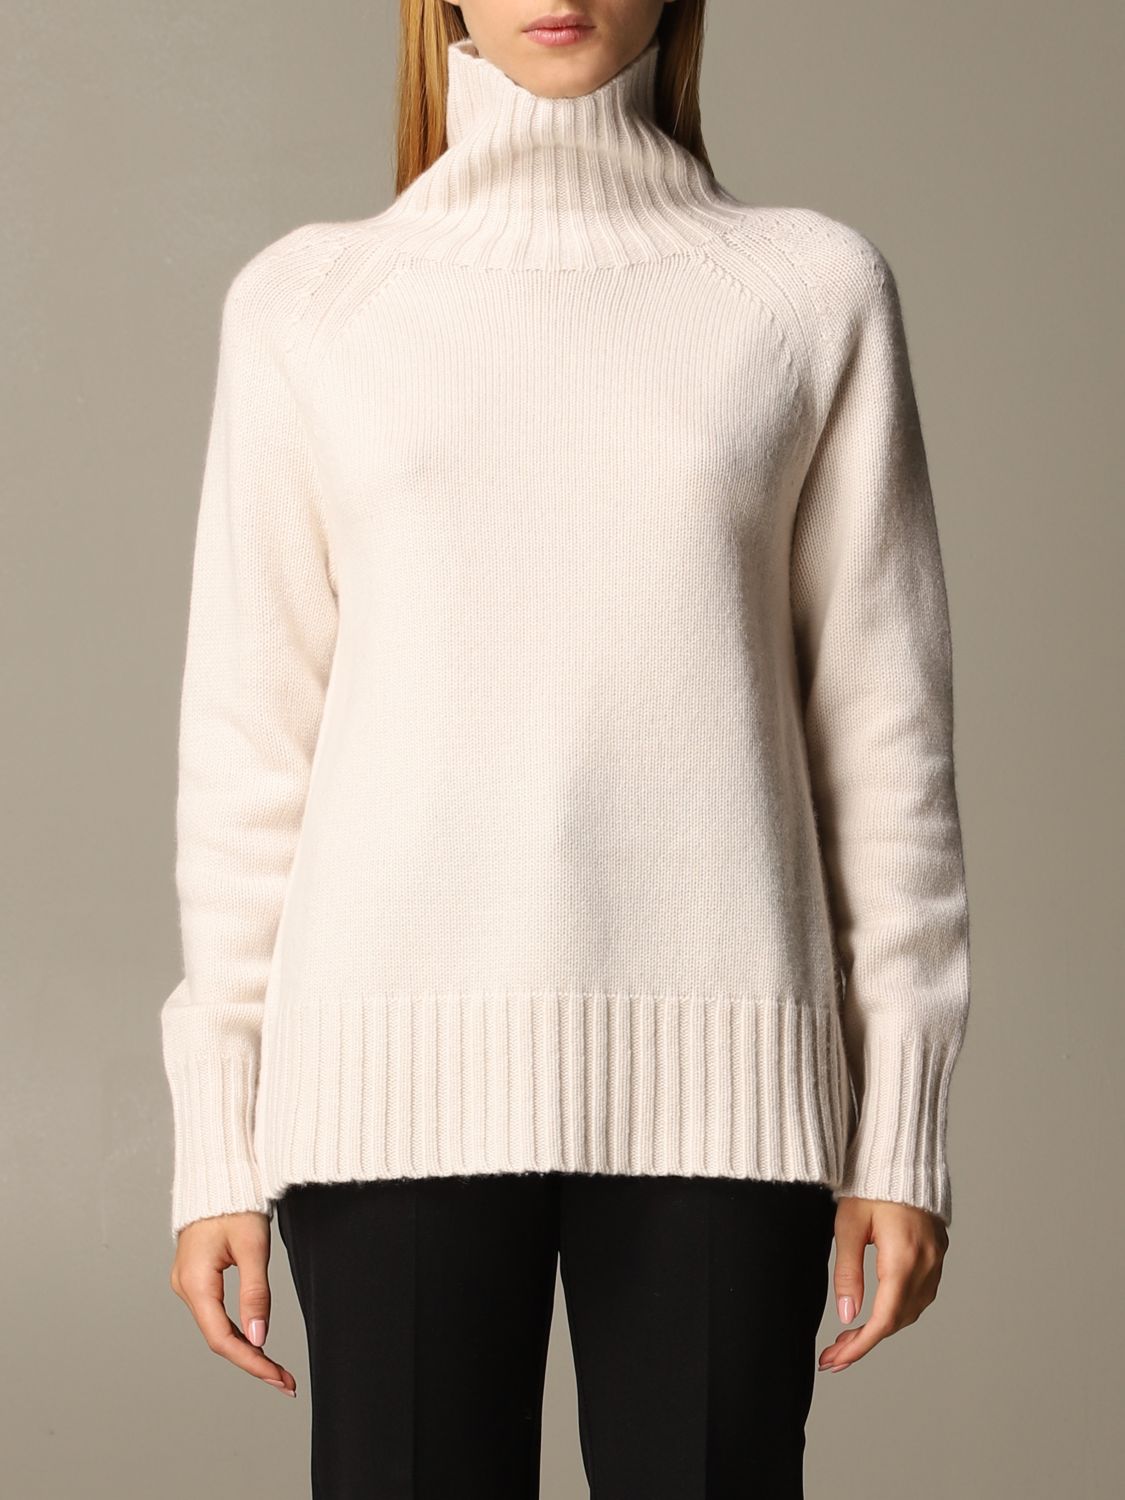 S Max Mara Outlet: Mantova pullover in wool and cashmere - White